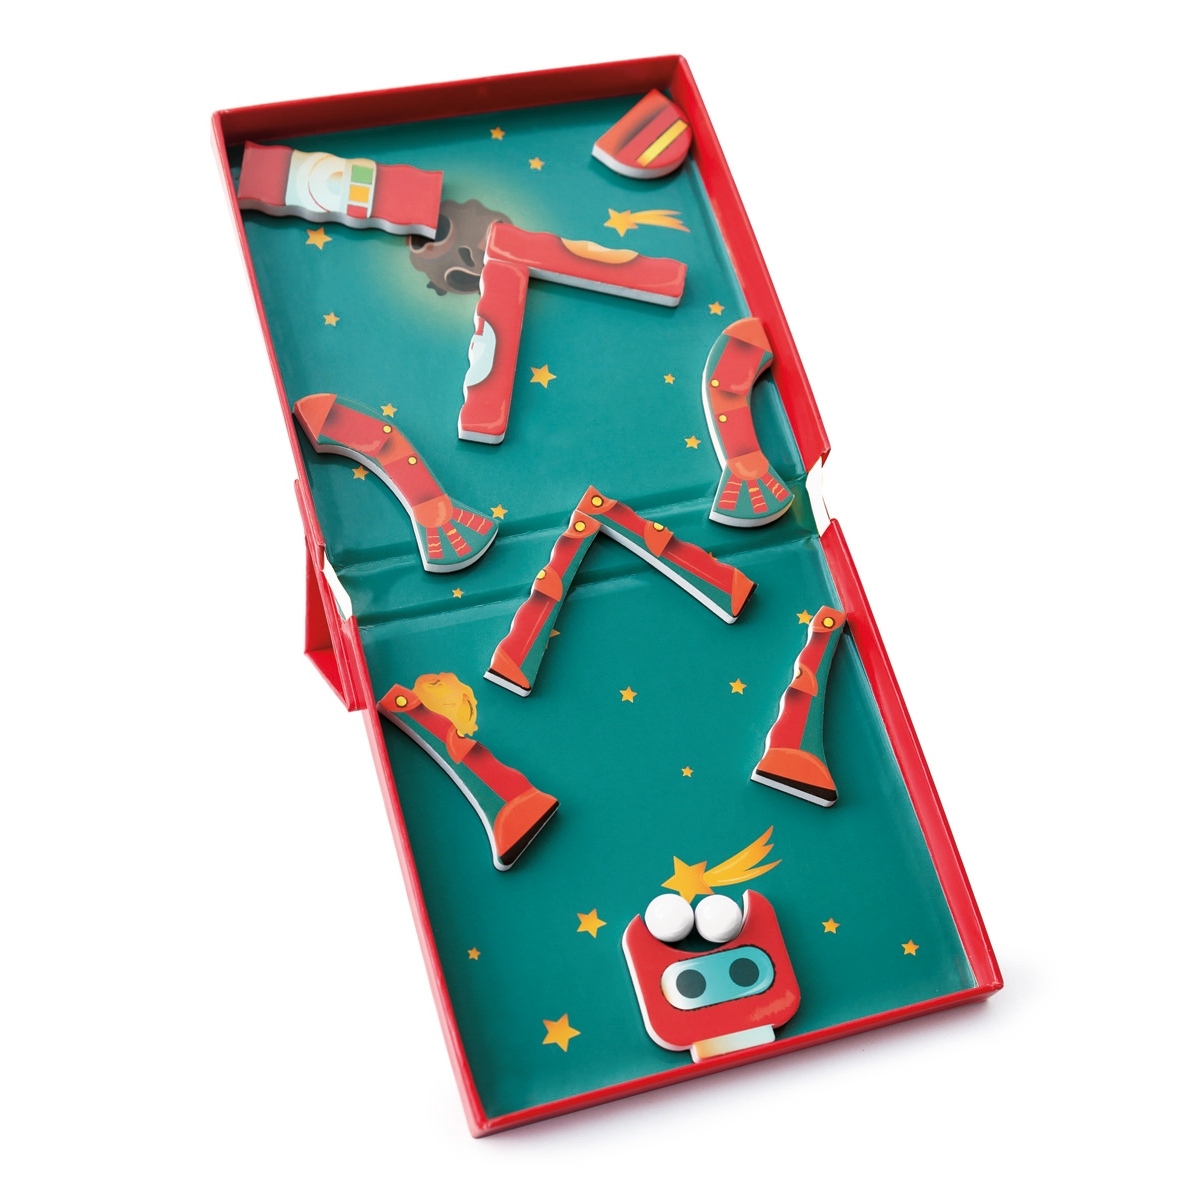 Here's another sneak peek of our May bag!  Kiddos are going to have a blast with this Magnetic Puzzle Run Robot as they transform the puzzle into a marble run and back! busybebes.com
#stemeducation #engineering #steamkidschallenge #screenfreekids #learningthroughplay